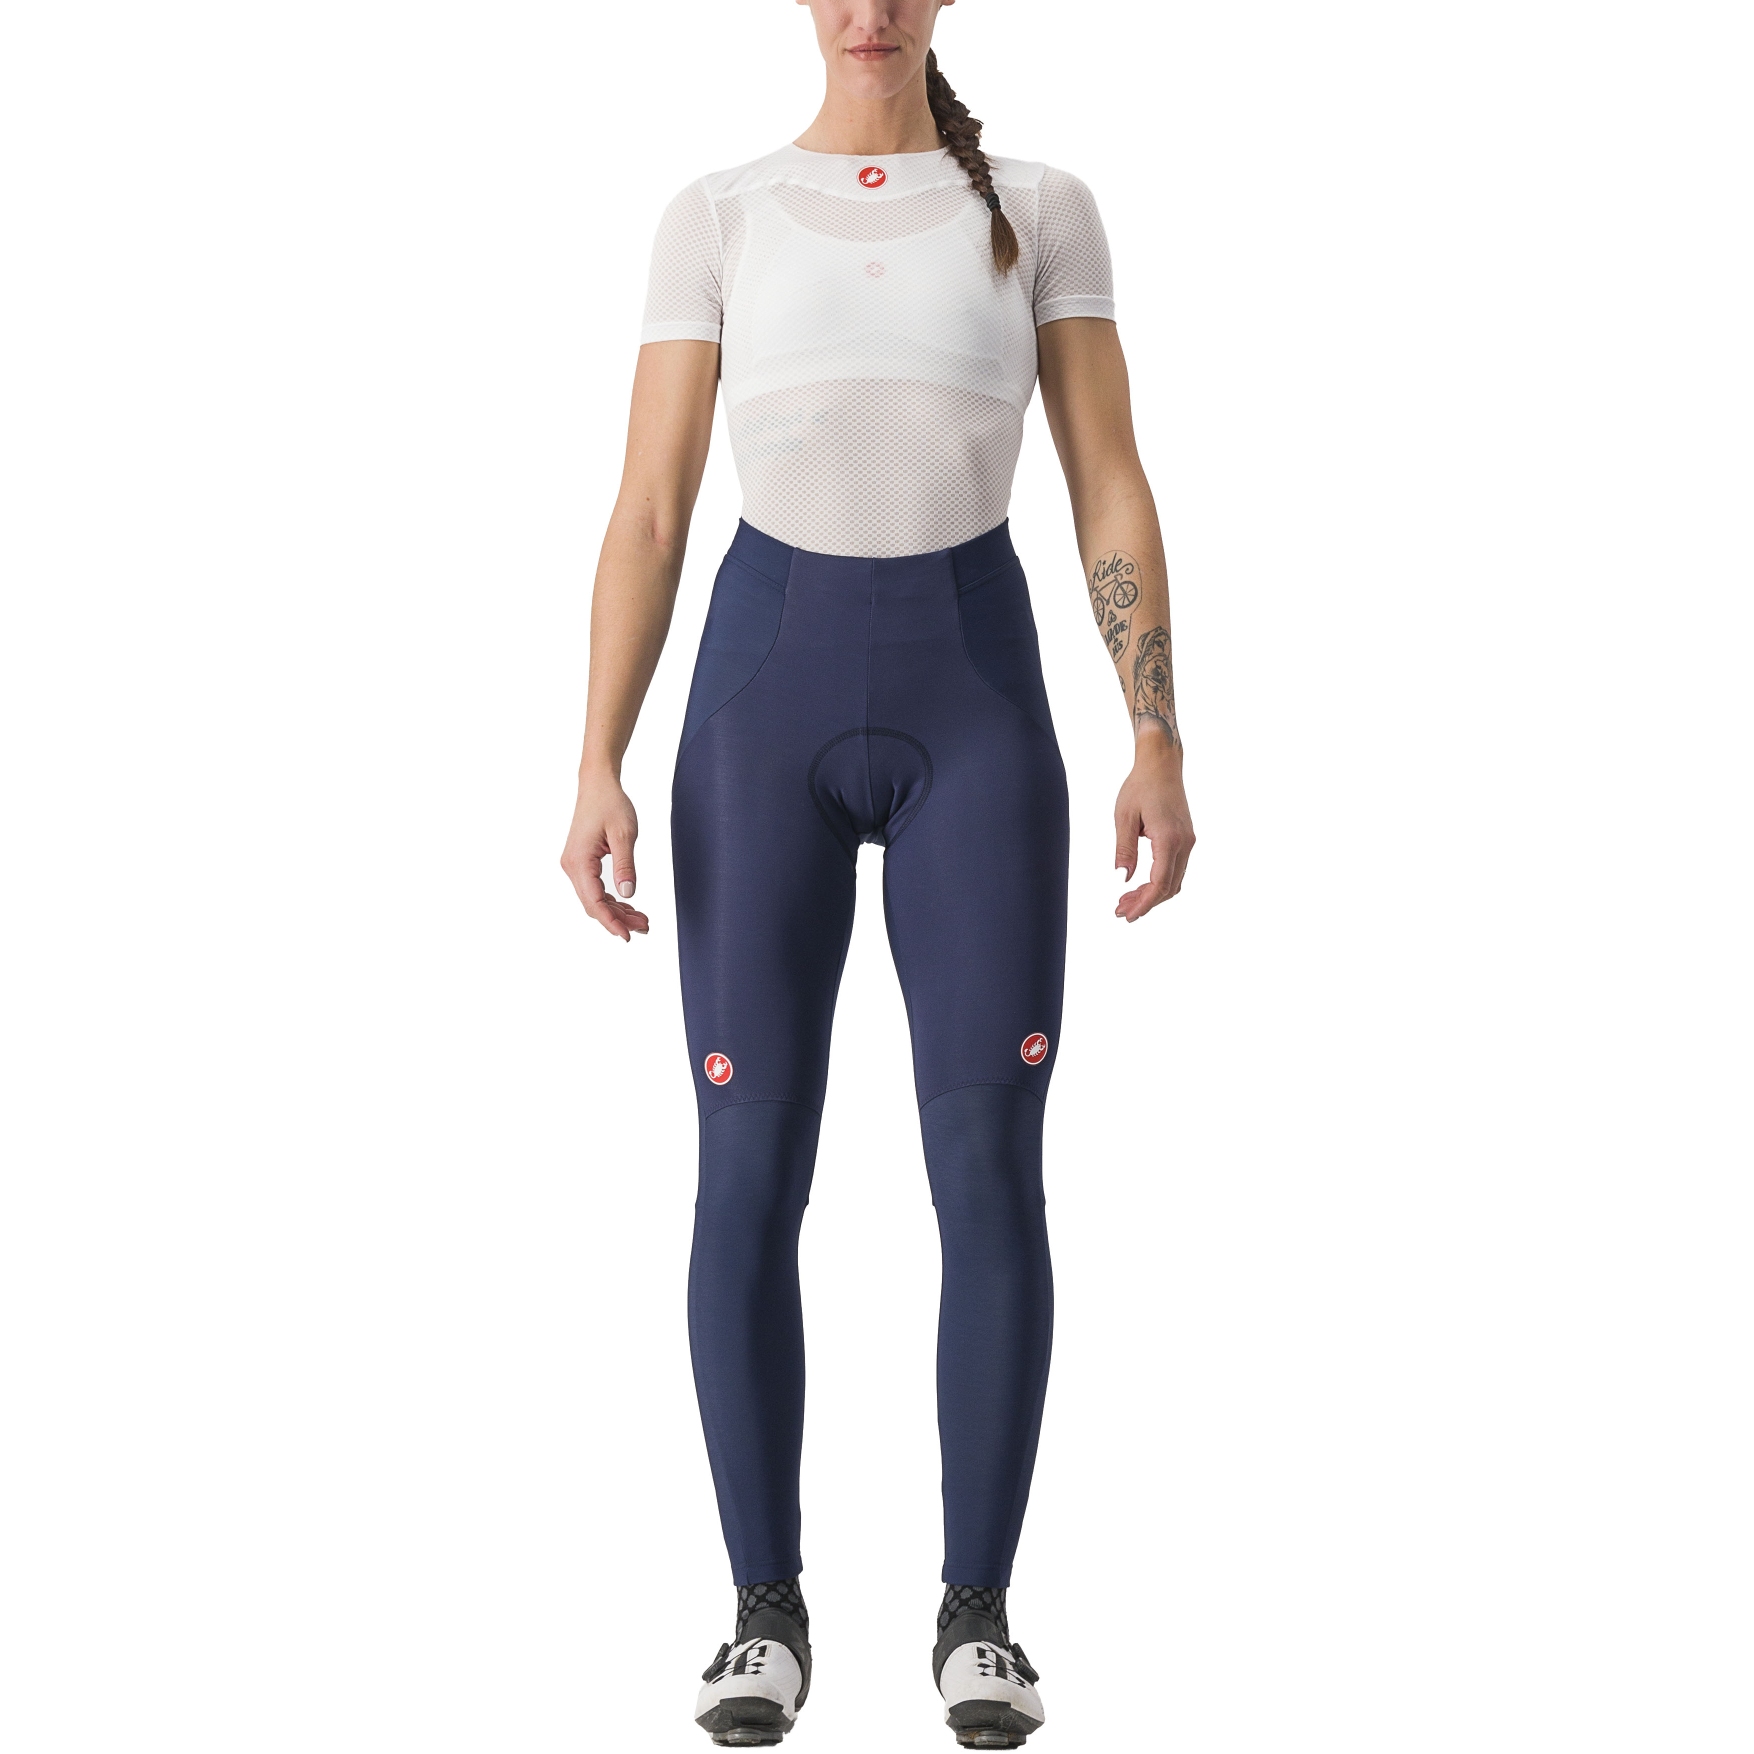 Picture of Castelli Sorpasso RoS Tights Women - belgian blue/silver reflex 424